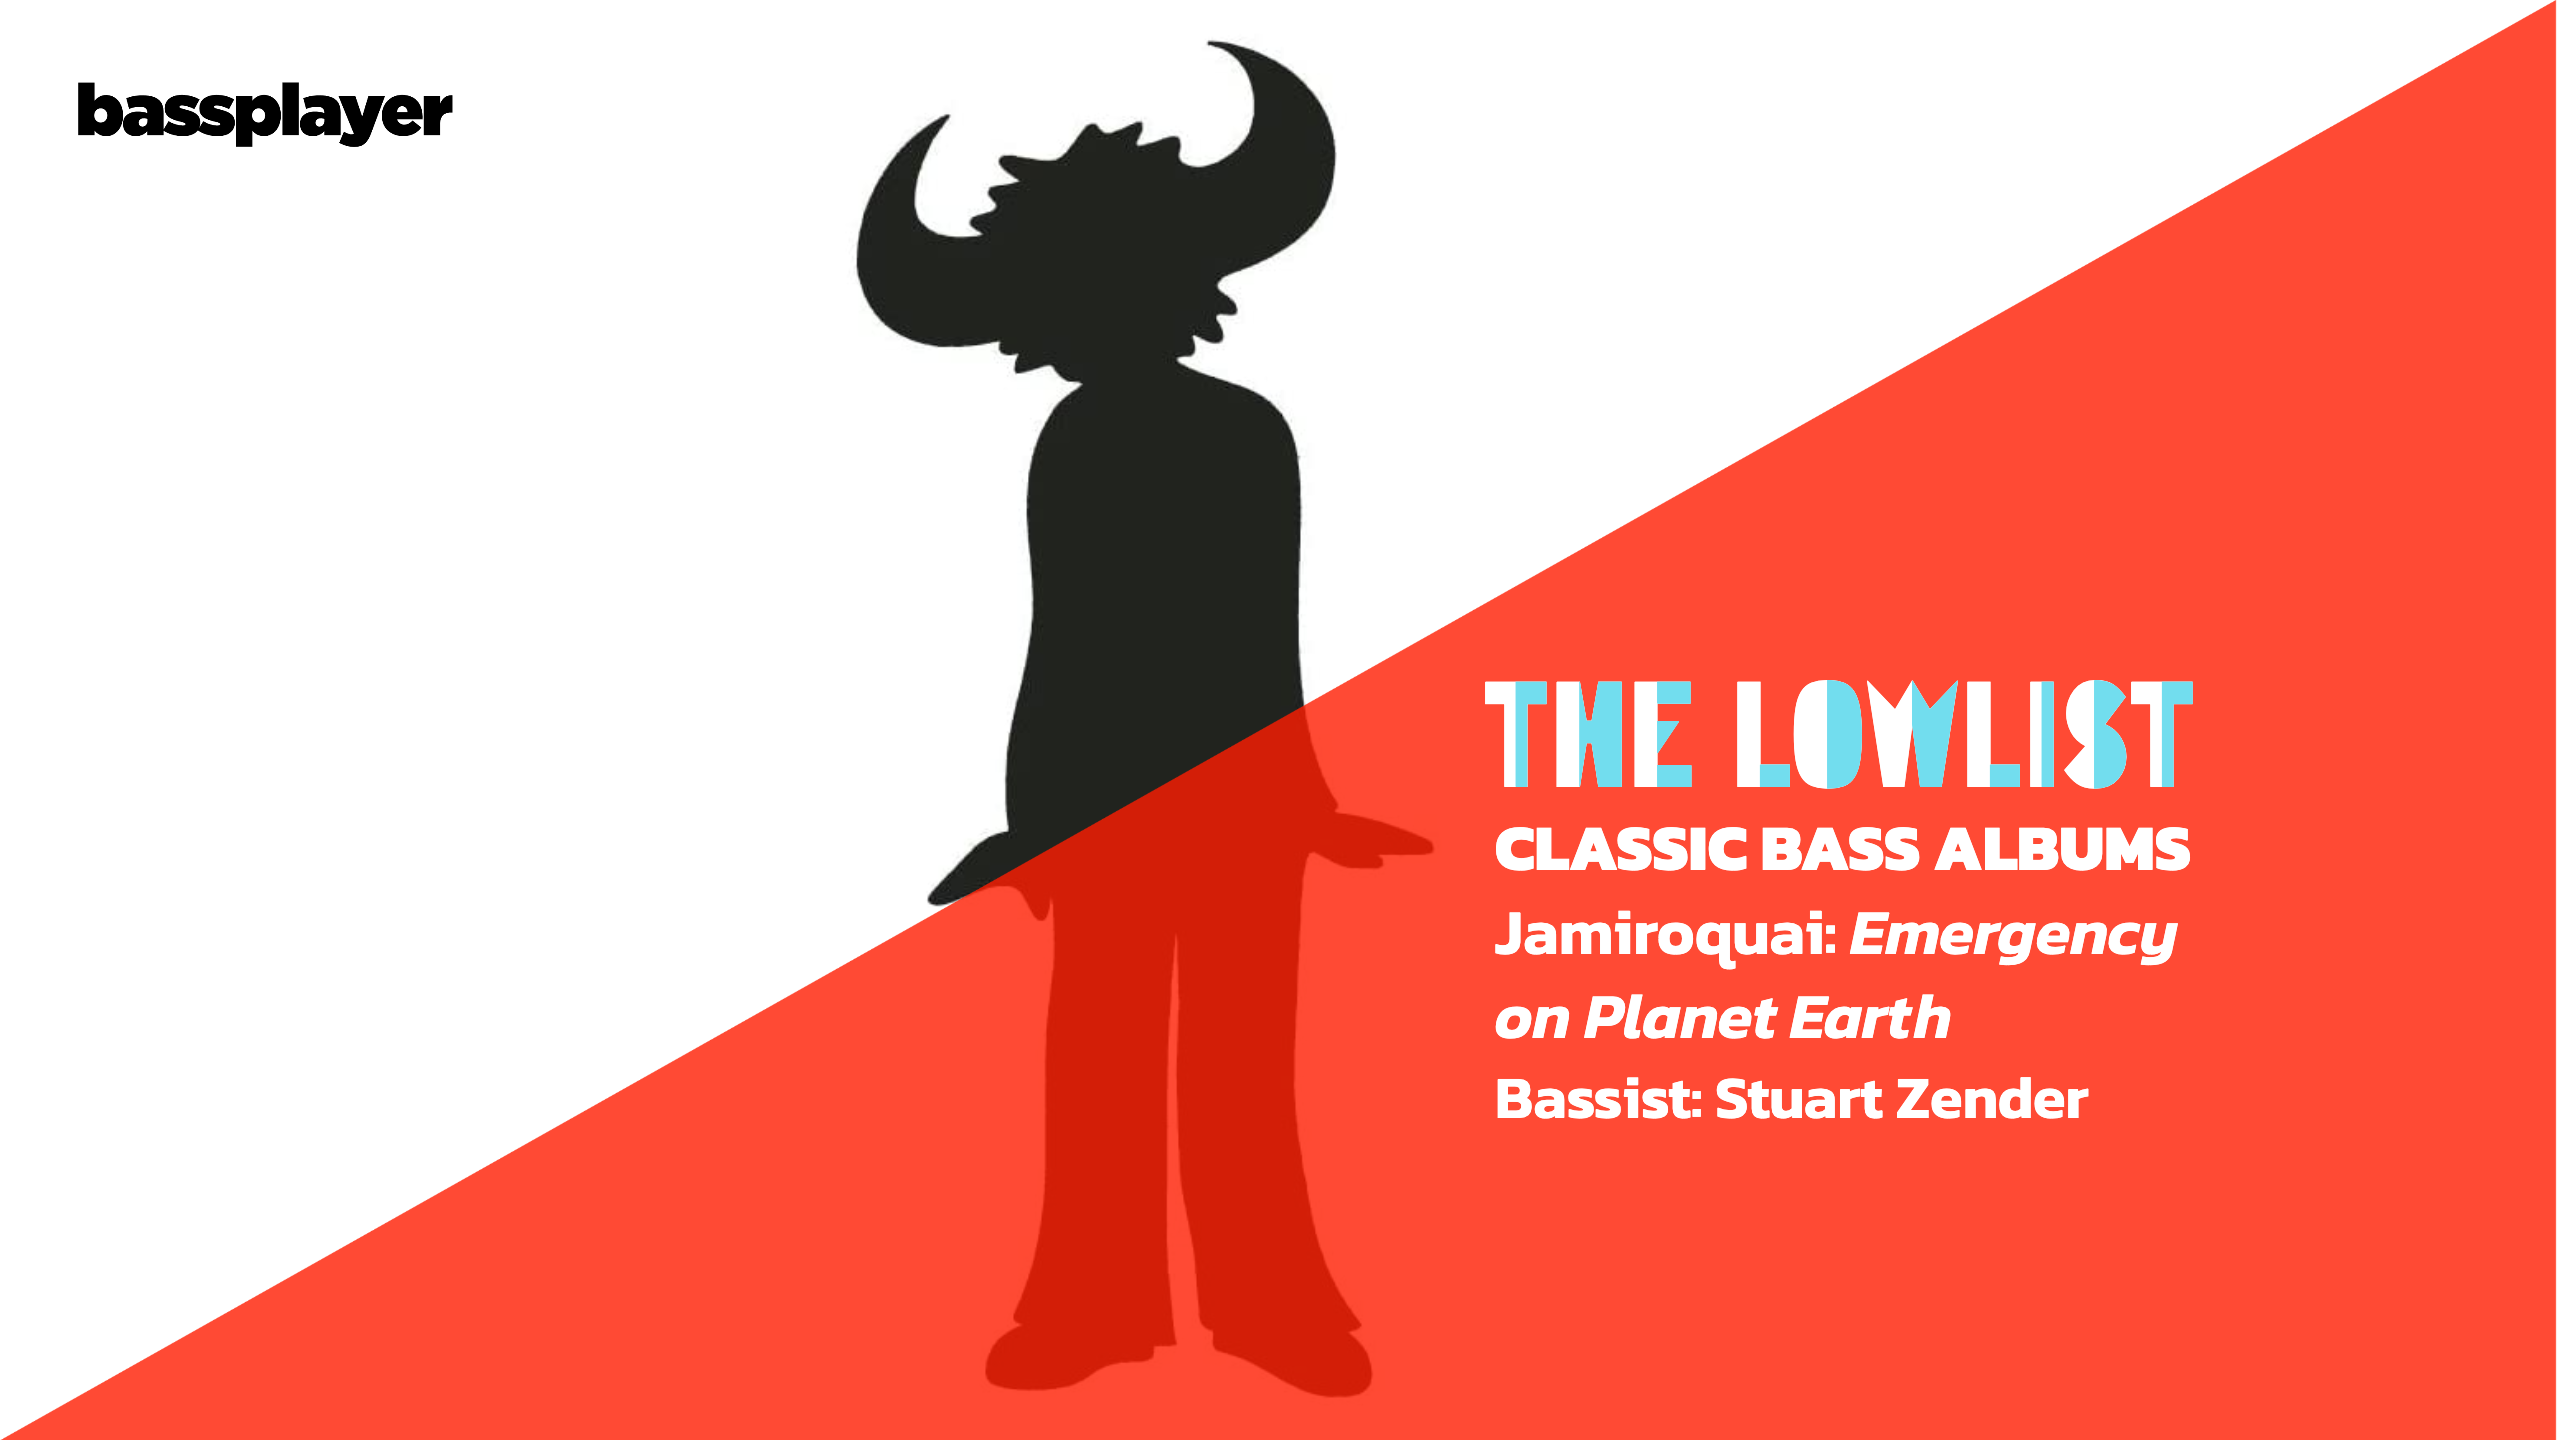 The Lowlist: Jamiroquai's Emergency on Planet Earth was a solid